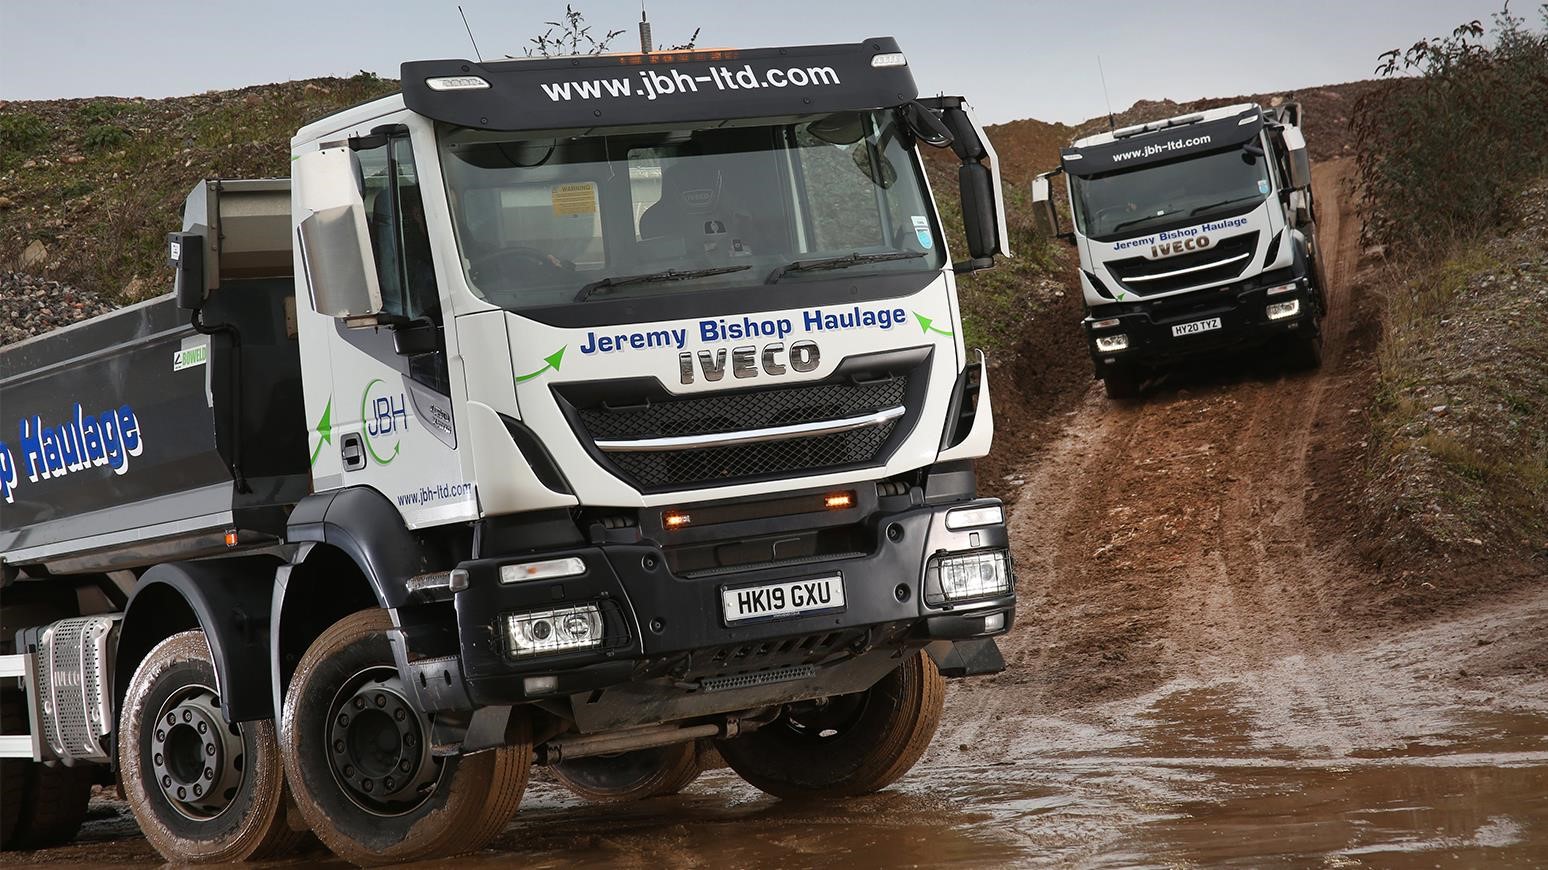 Devon-Based Construction Services Specialist Adds Two IVECO Stralis X-WAY Tipper Trucks To Its Fleet